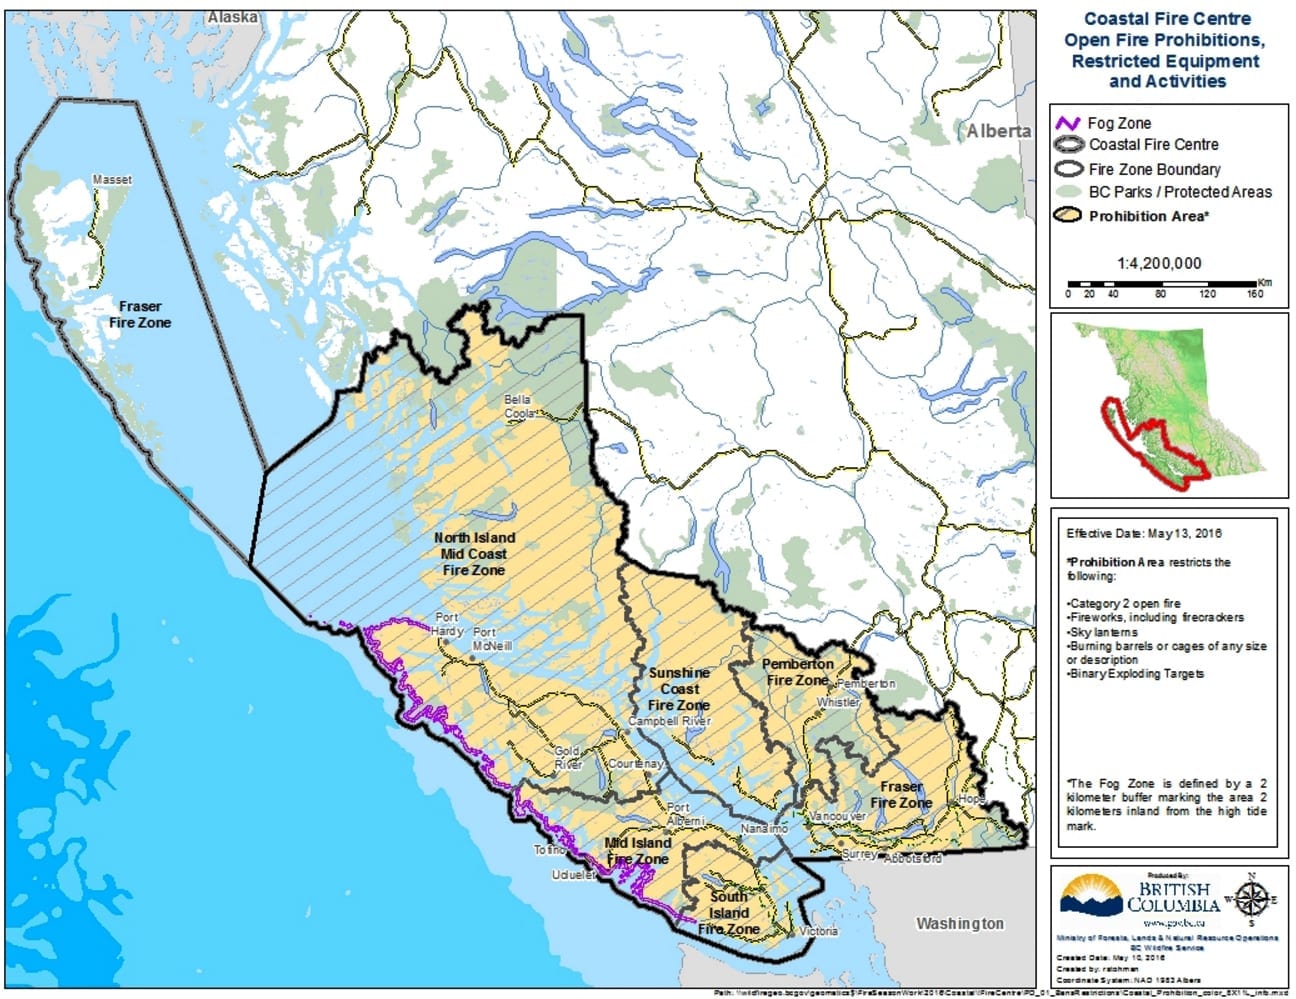 Area affected by the fire ban. Map from Coastal Fire Centre 